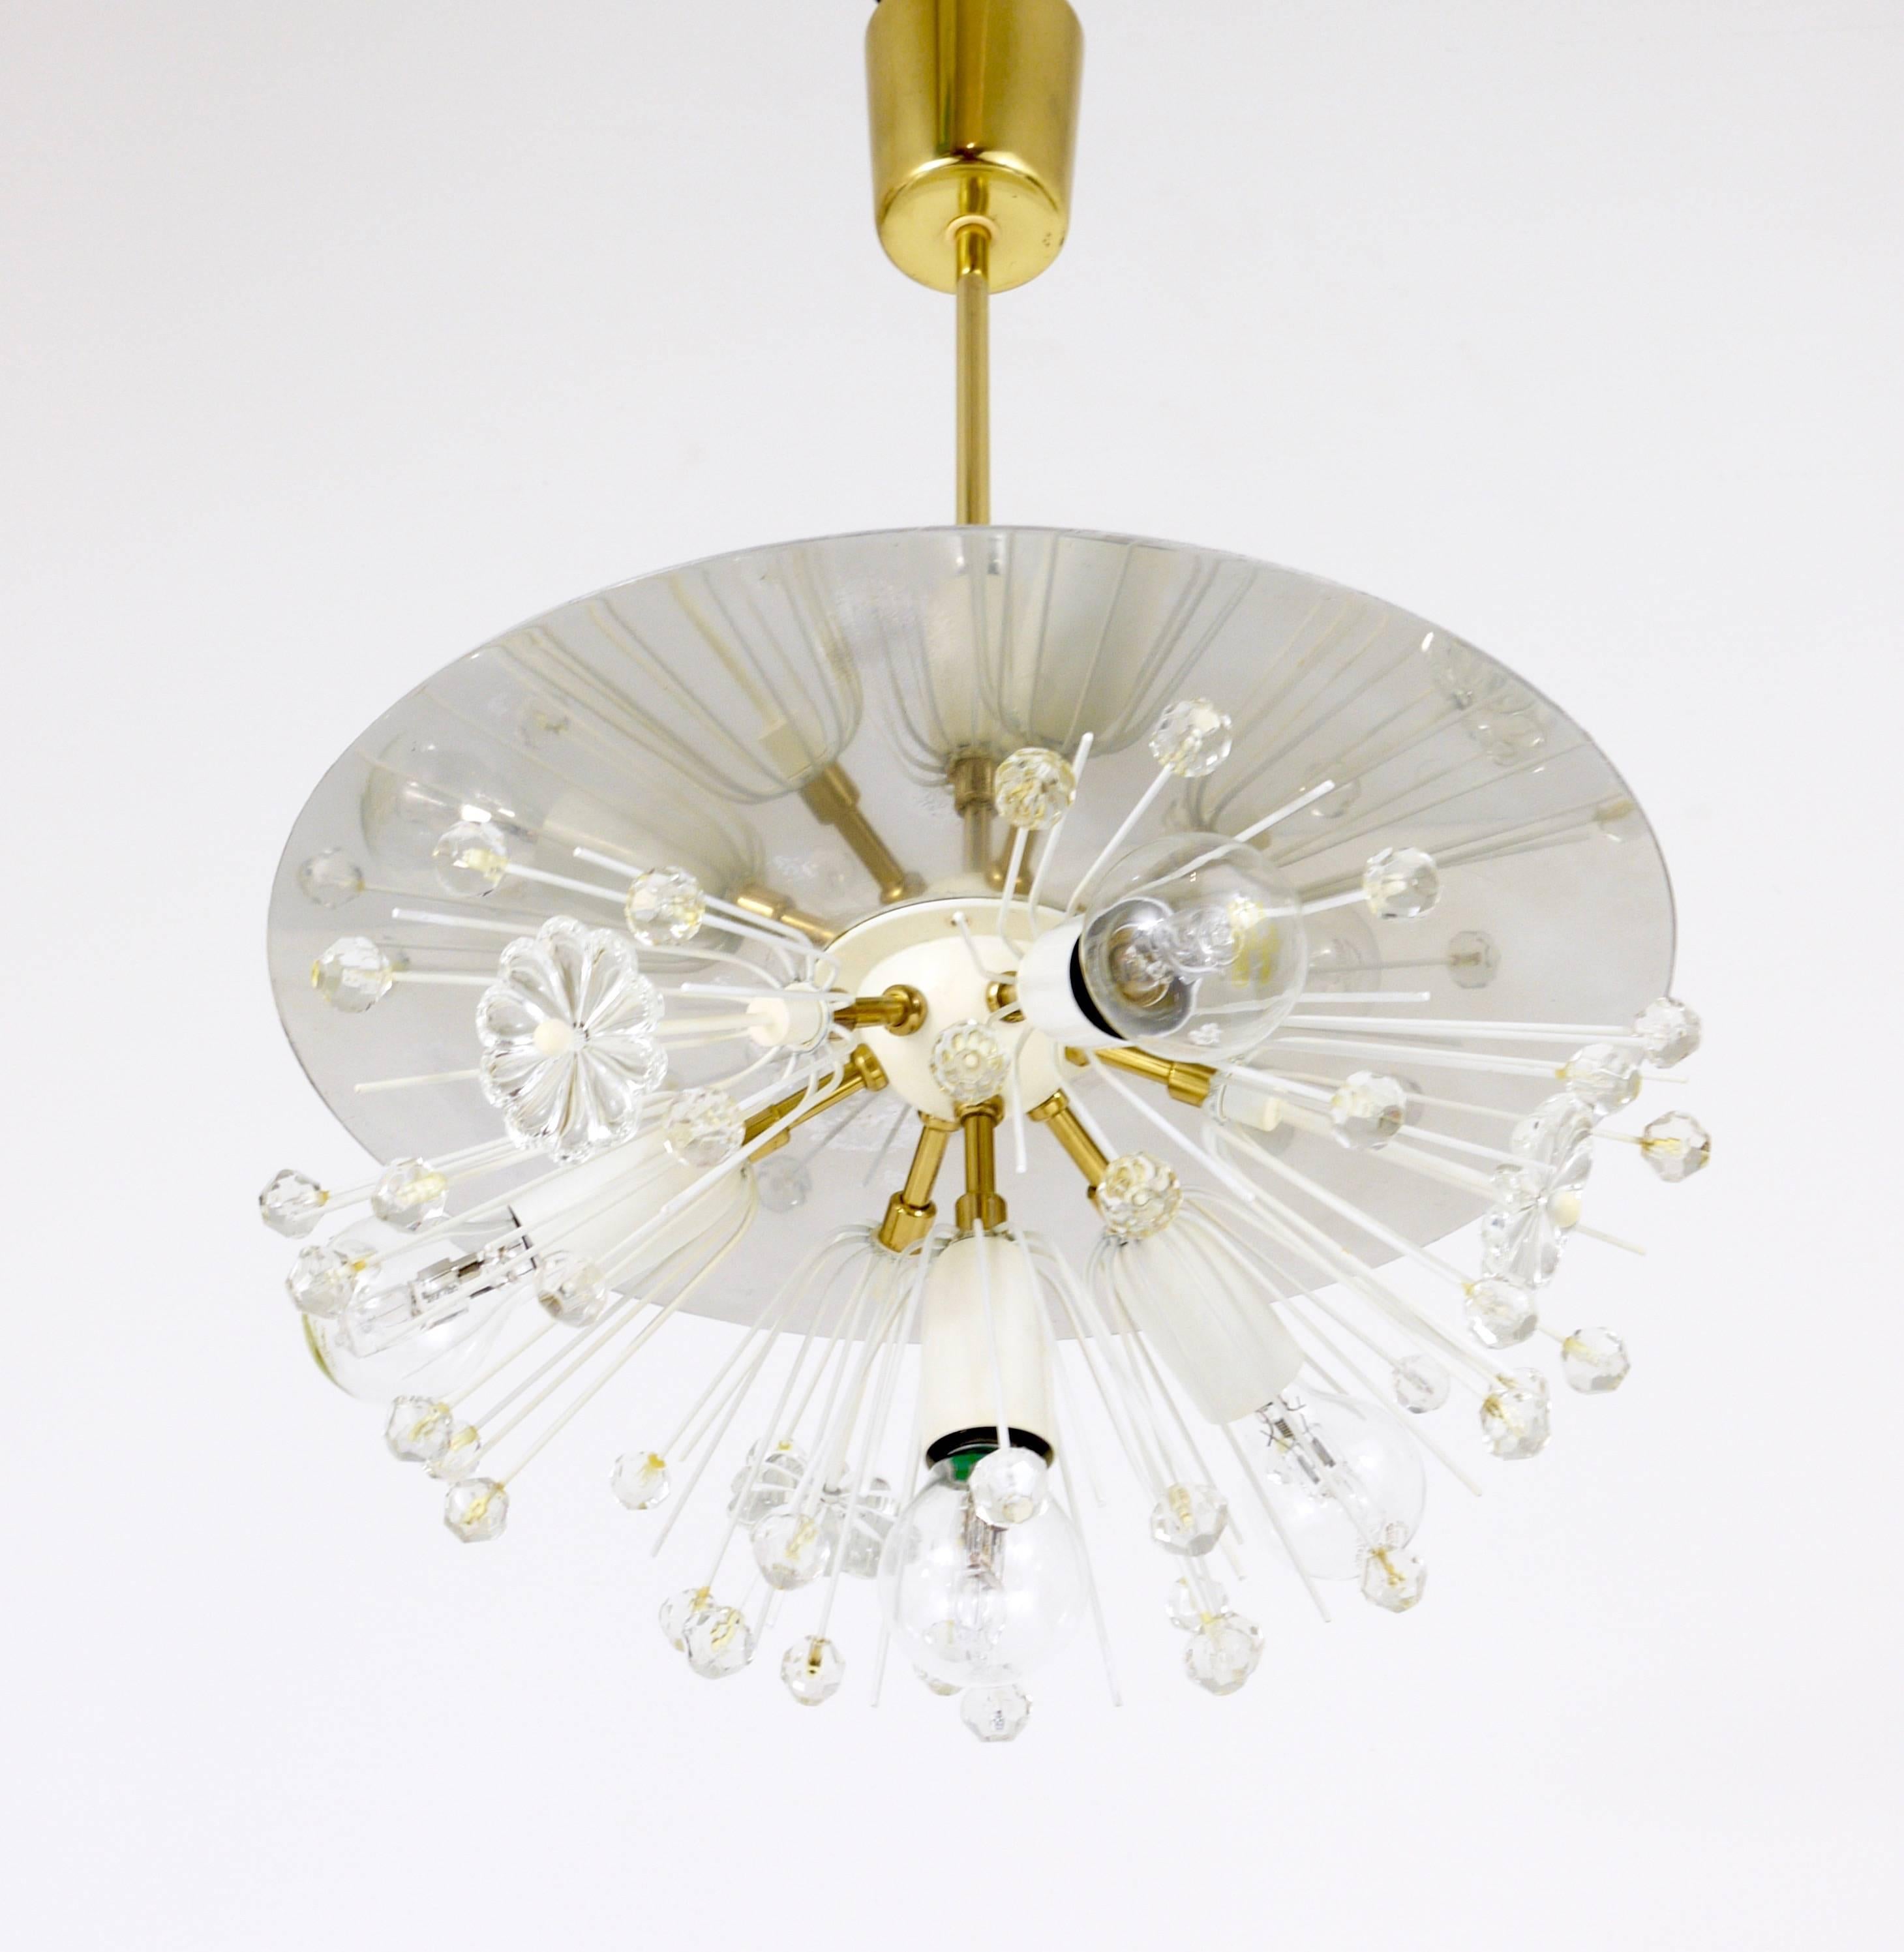 A beautiful and unusual hemispherical blowball snowflake dandelion sputnik chandelier, designed by Emil Stejnar, manufactured in the 1950s by Rupert Nikoll, Vienna. An early model with a white globe in the center and a nickel-plated reflector disc.